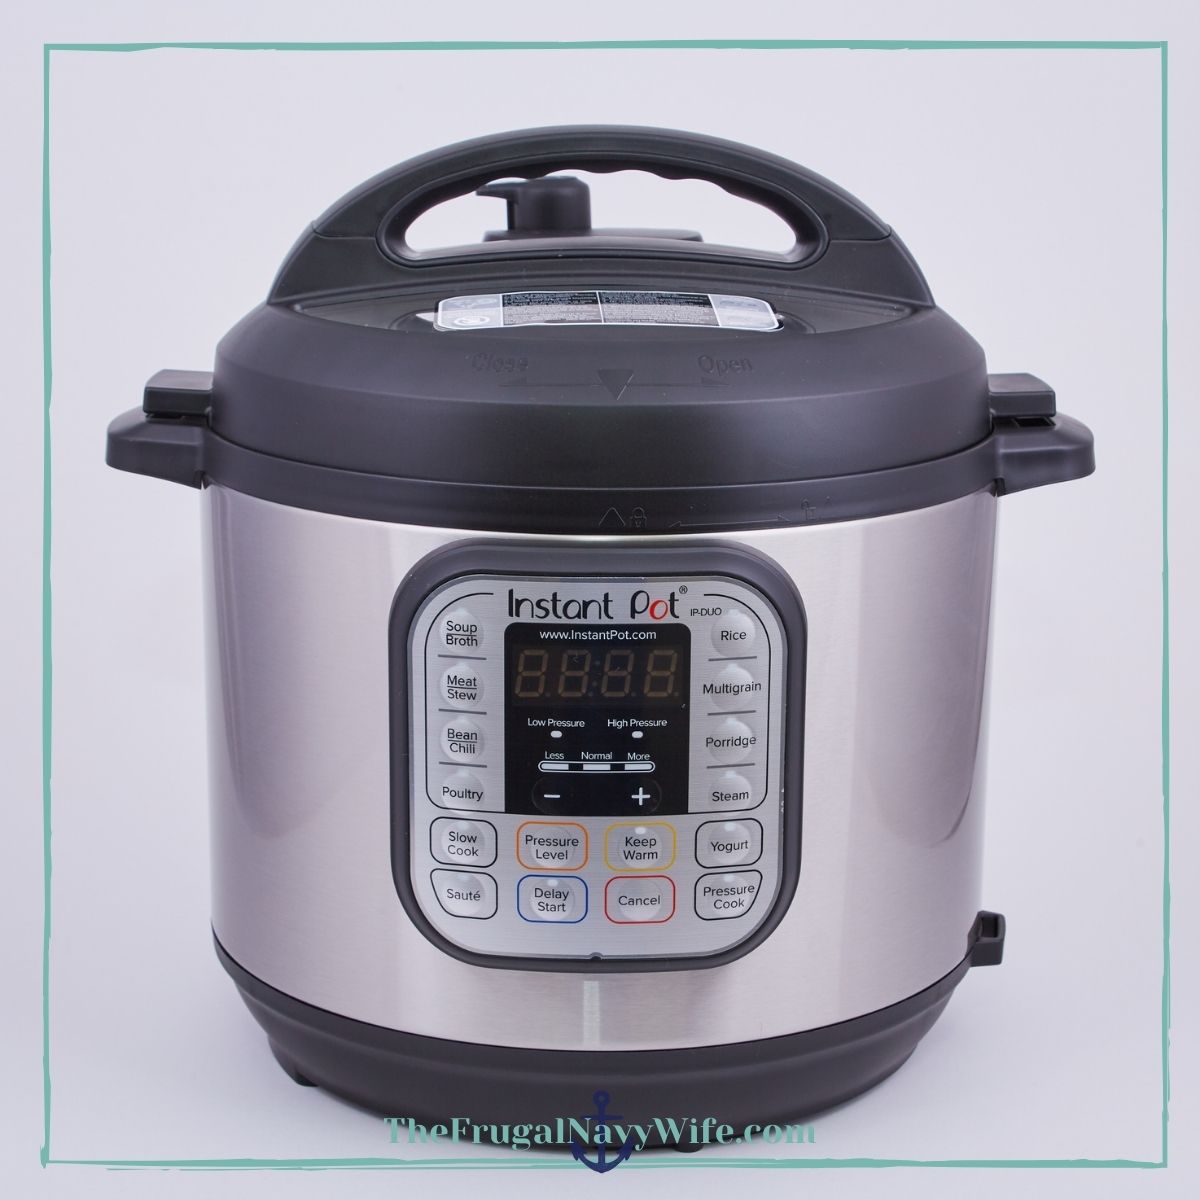 https://www.thefrugalnavywife.com/wp-content/uploads/2022/01/Instant-Pot-Accessories-You-Must-Have.jpg